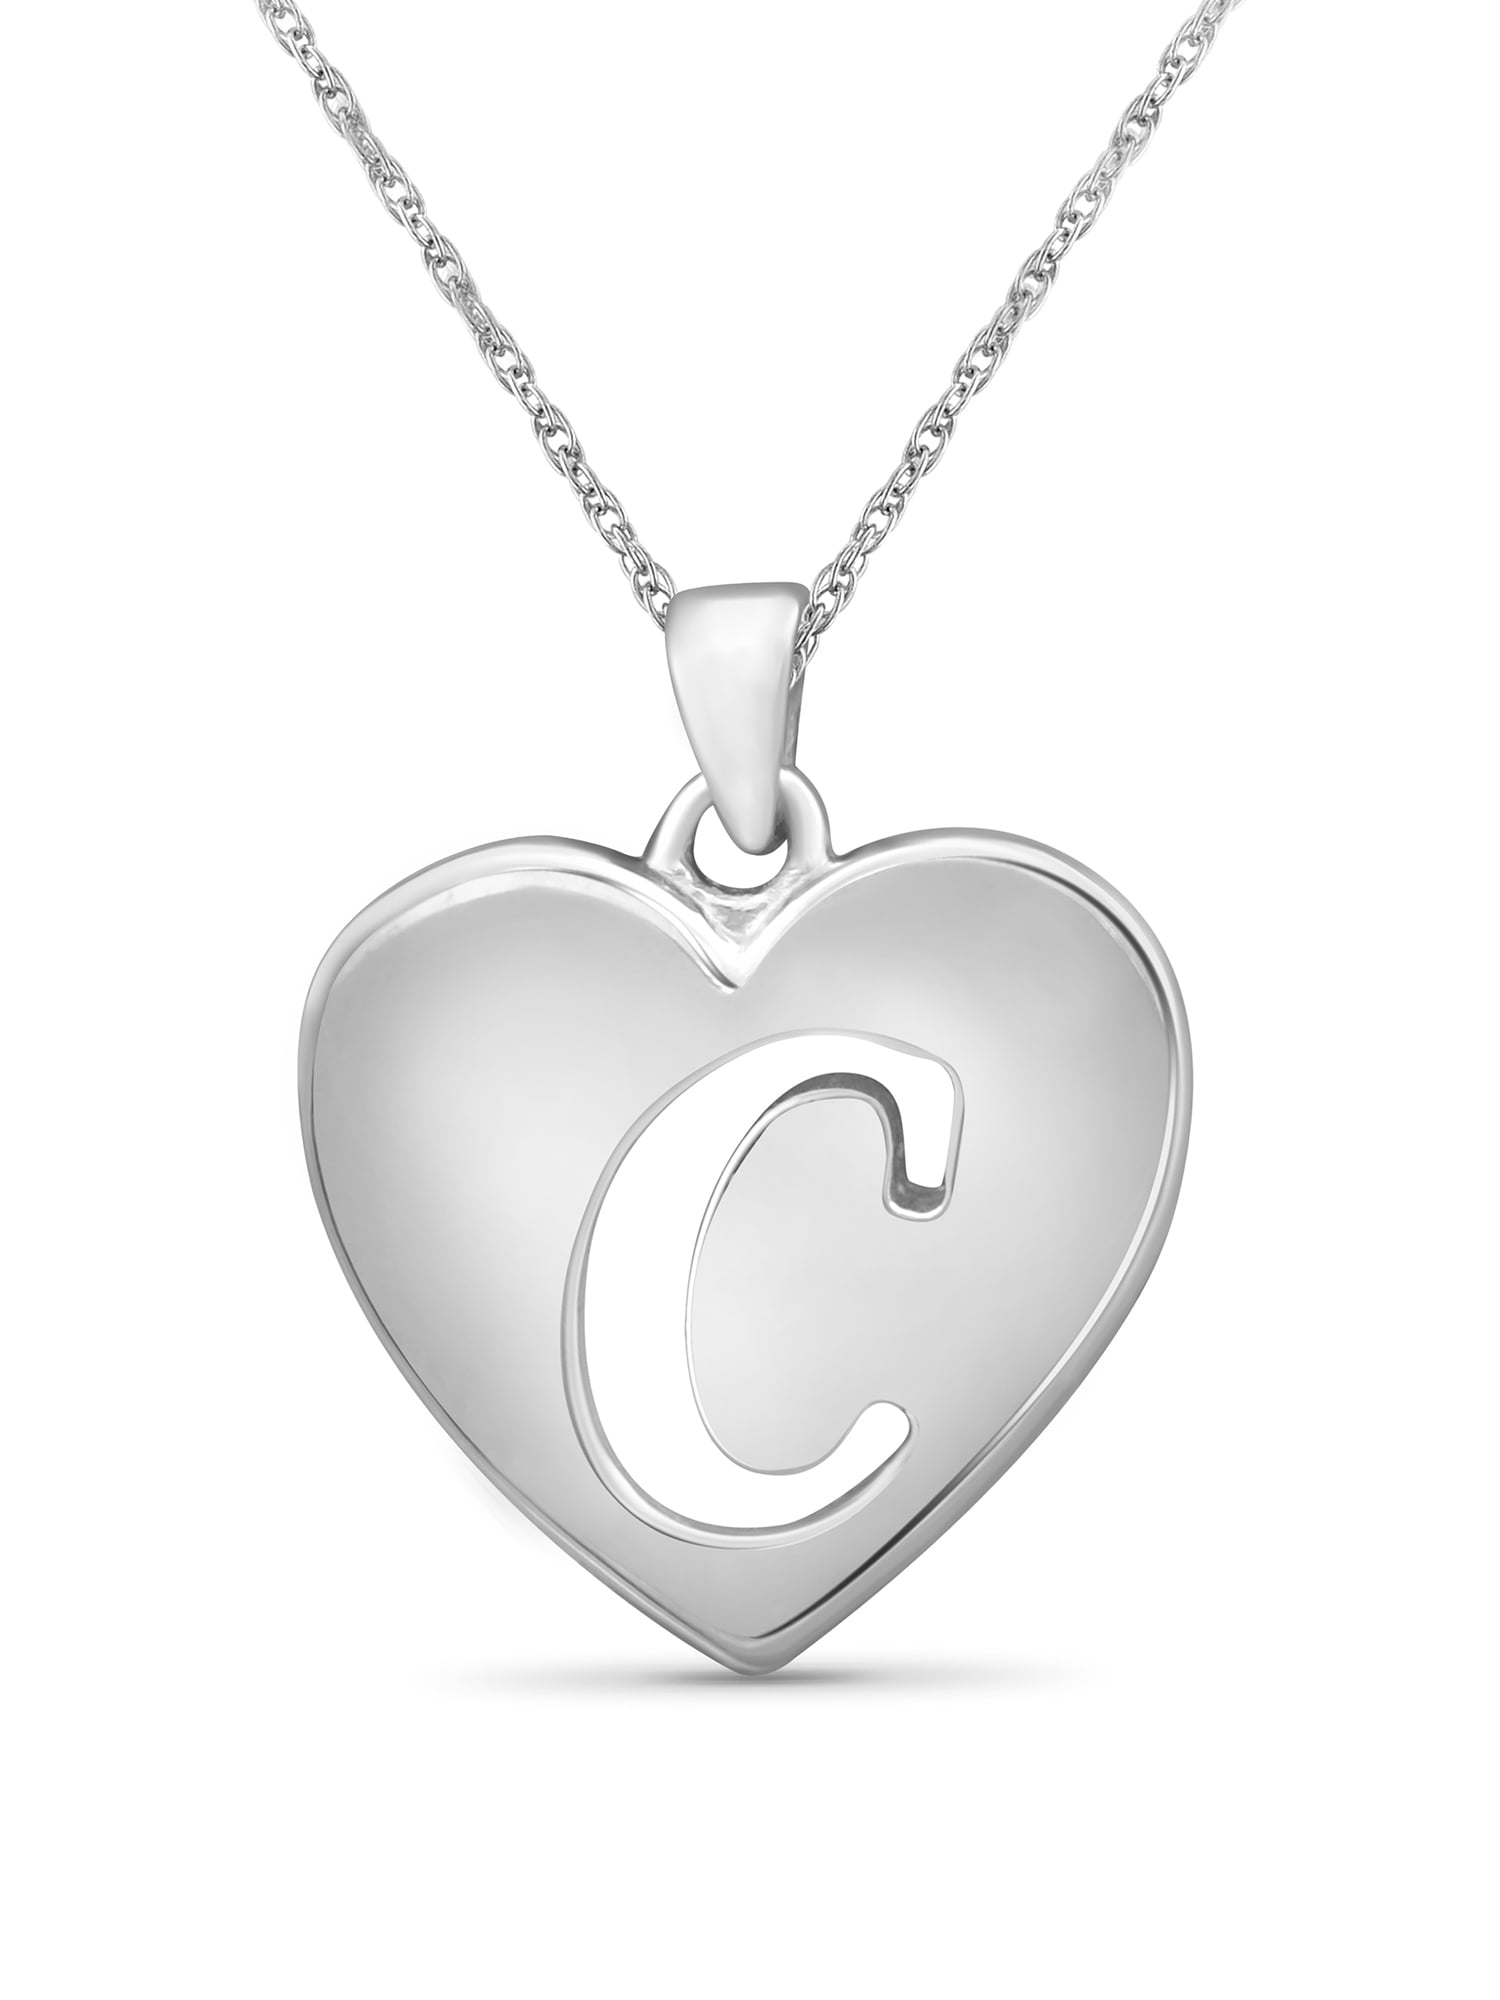 Personalised Necklaces | Personalised by Silvery Jewellery in South Africa